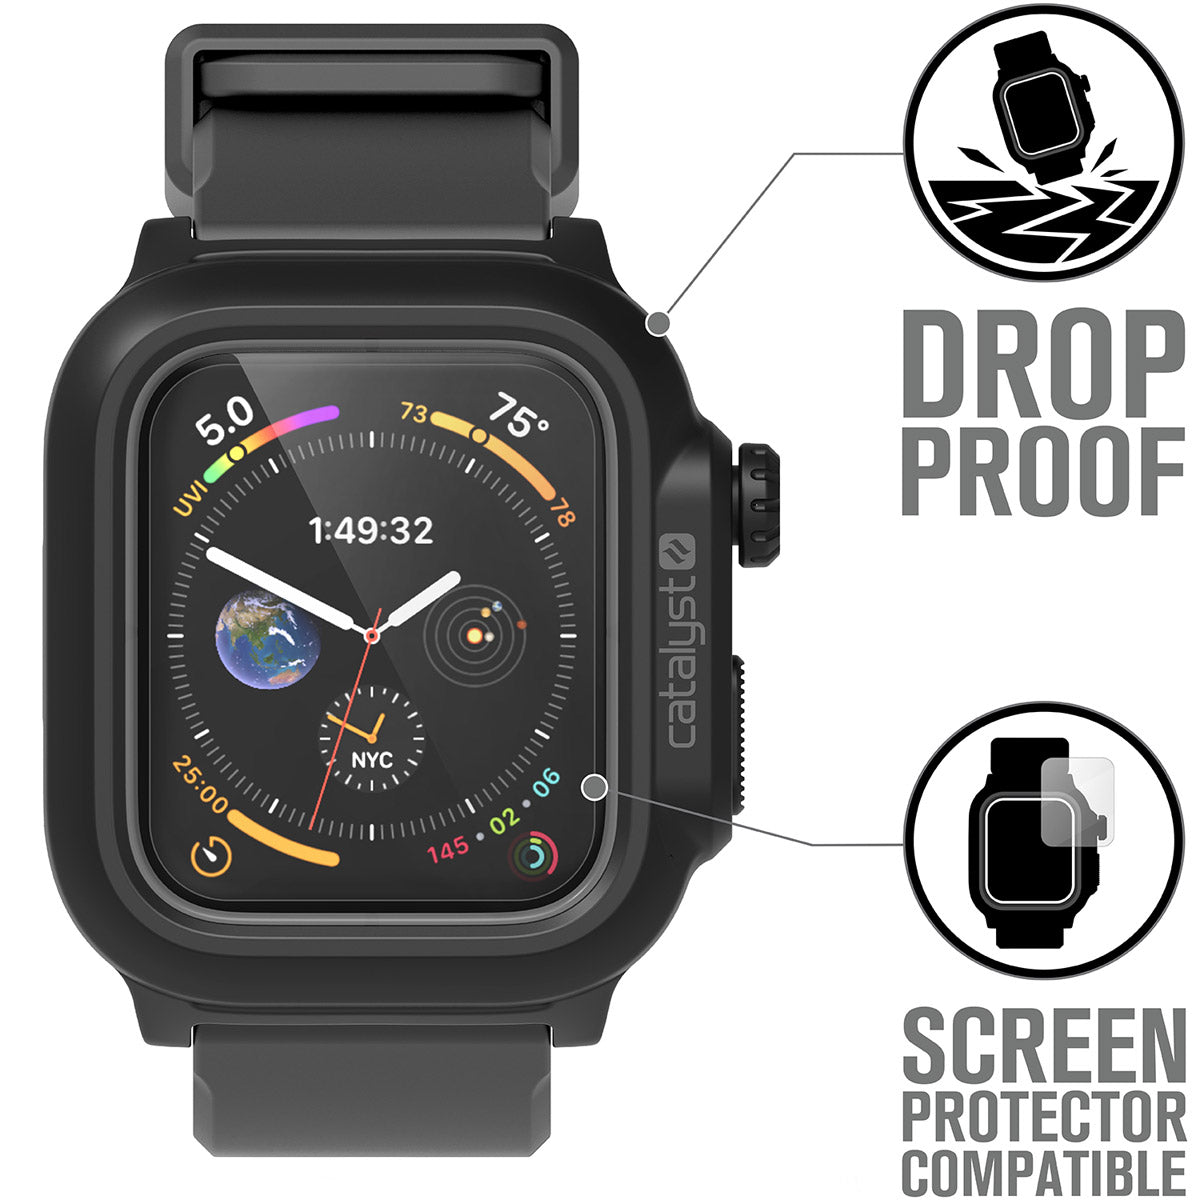 catalyst apple watch series 6 5 4 se gen 2 1 40mm 44mm waterproof case band black gray showing the screen protector compatibility text reads drop proof screen protector compatible